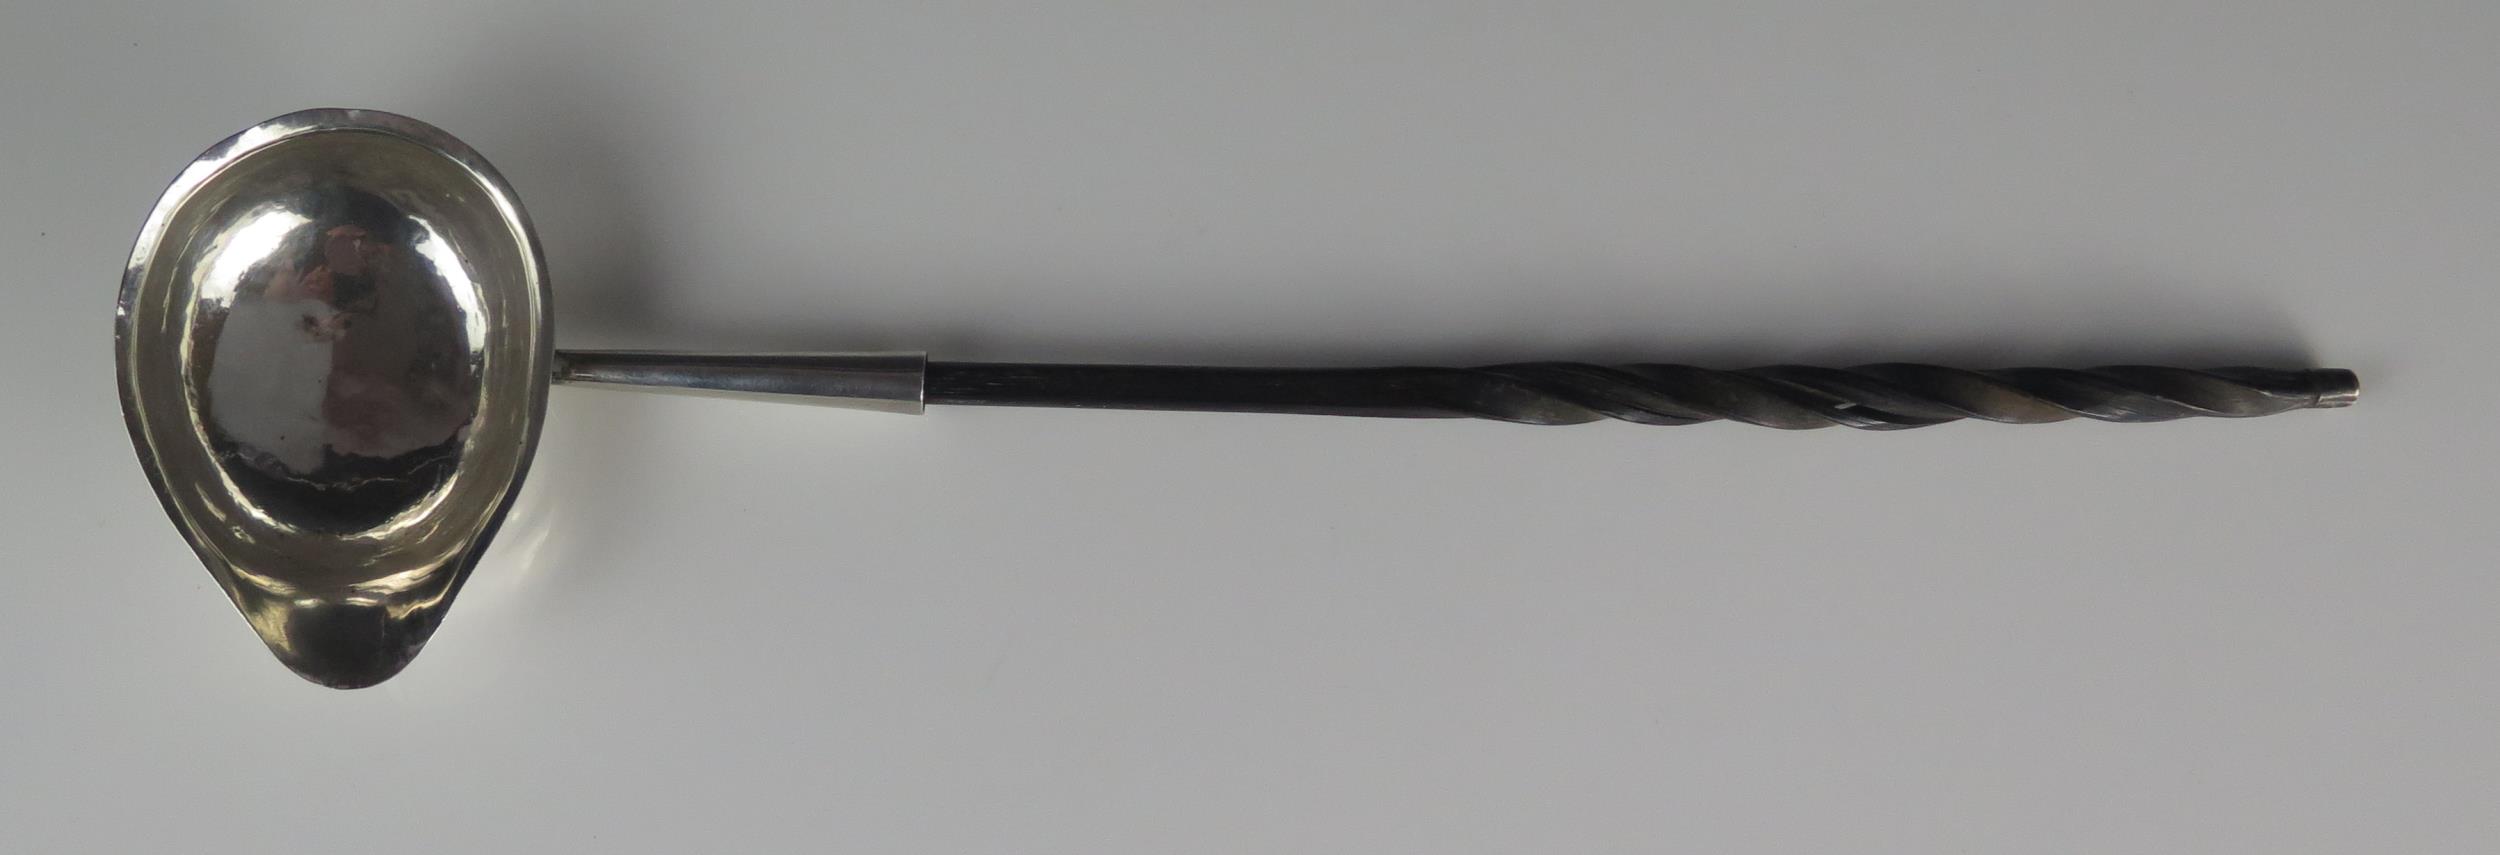 A George III silver toddy ladle, makers mark worn possibly T.S, London, 1779, monogrammed, mounted